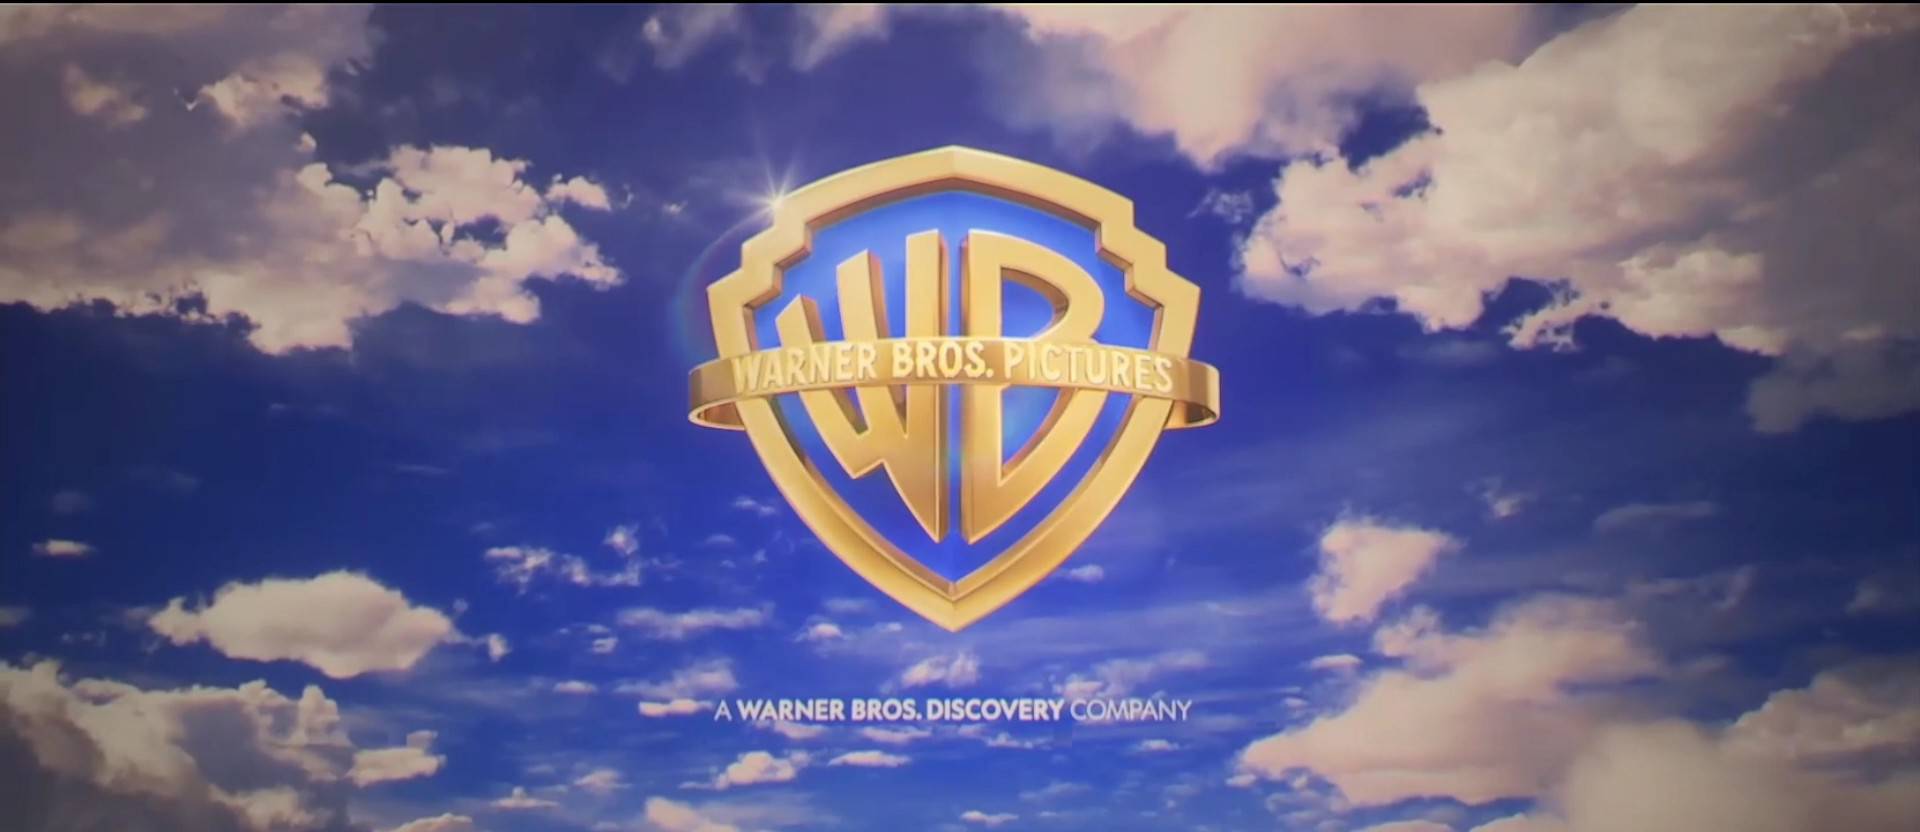 Warner Bros. Pictures (2023, new logo) by AmazingCleos on DeviantArt